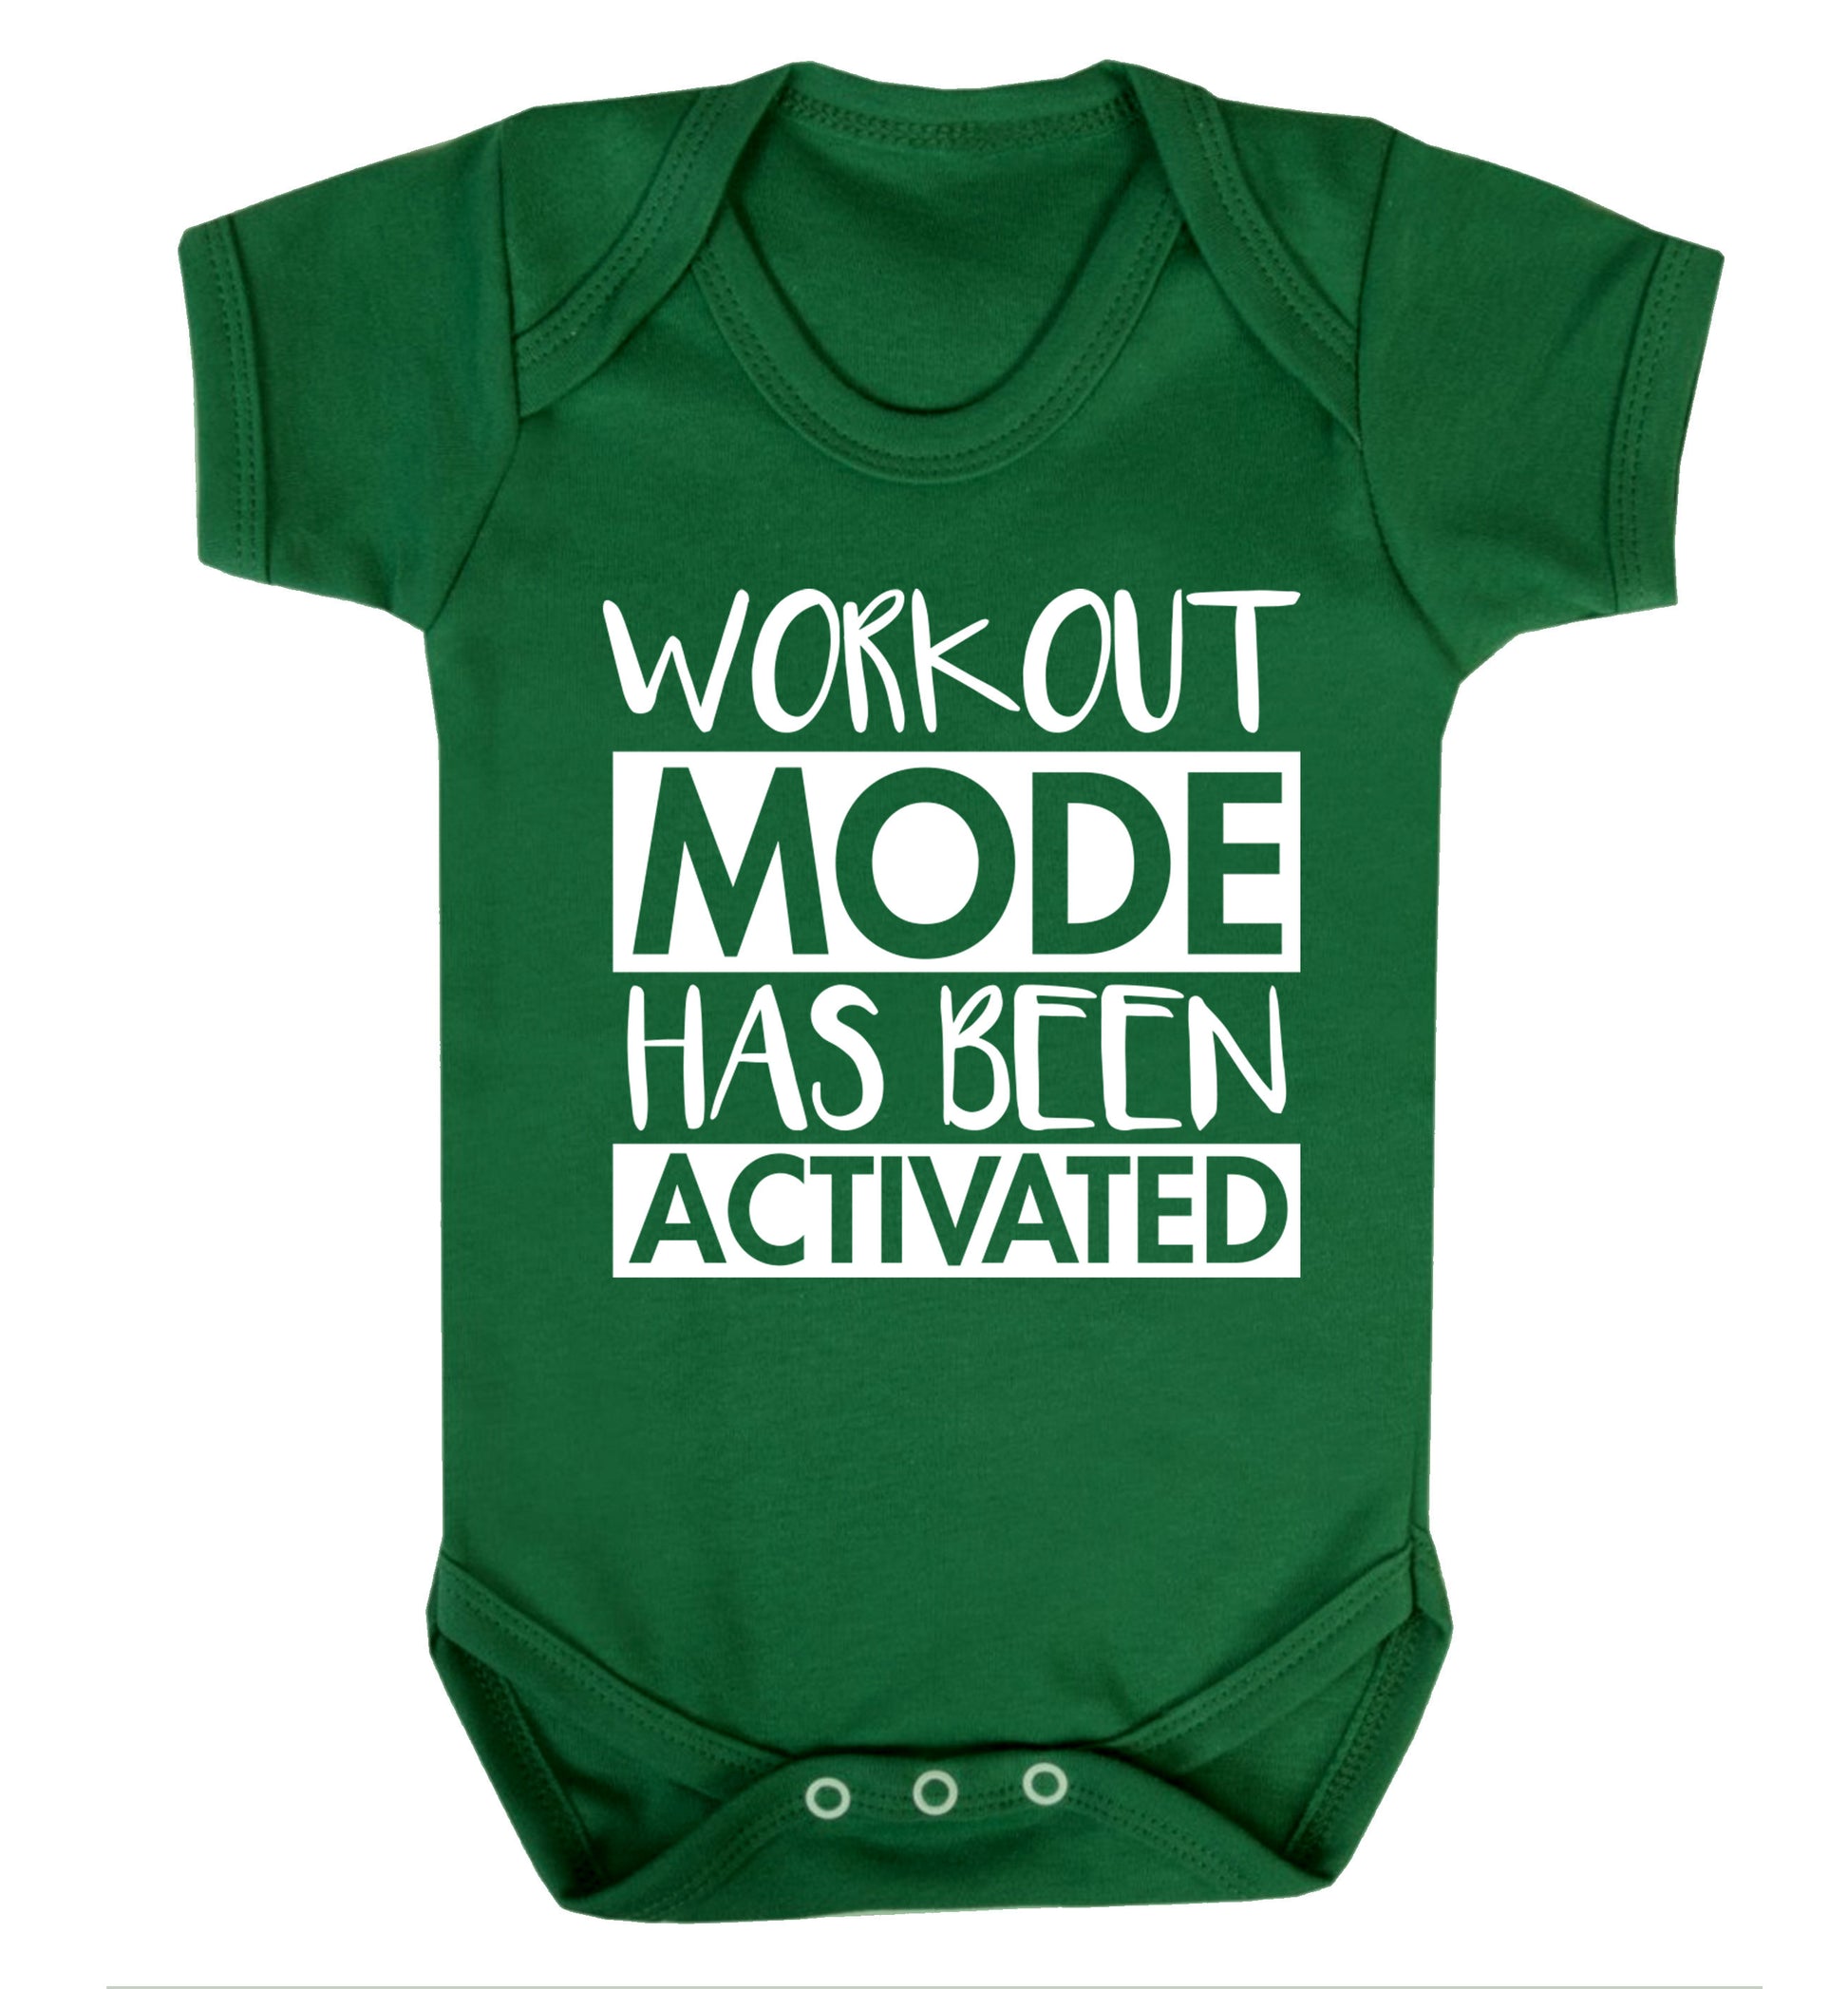 Workout mode has been activated Baby Vest green 18-24 months